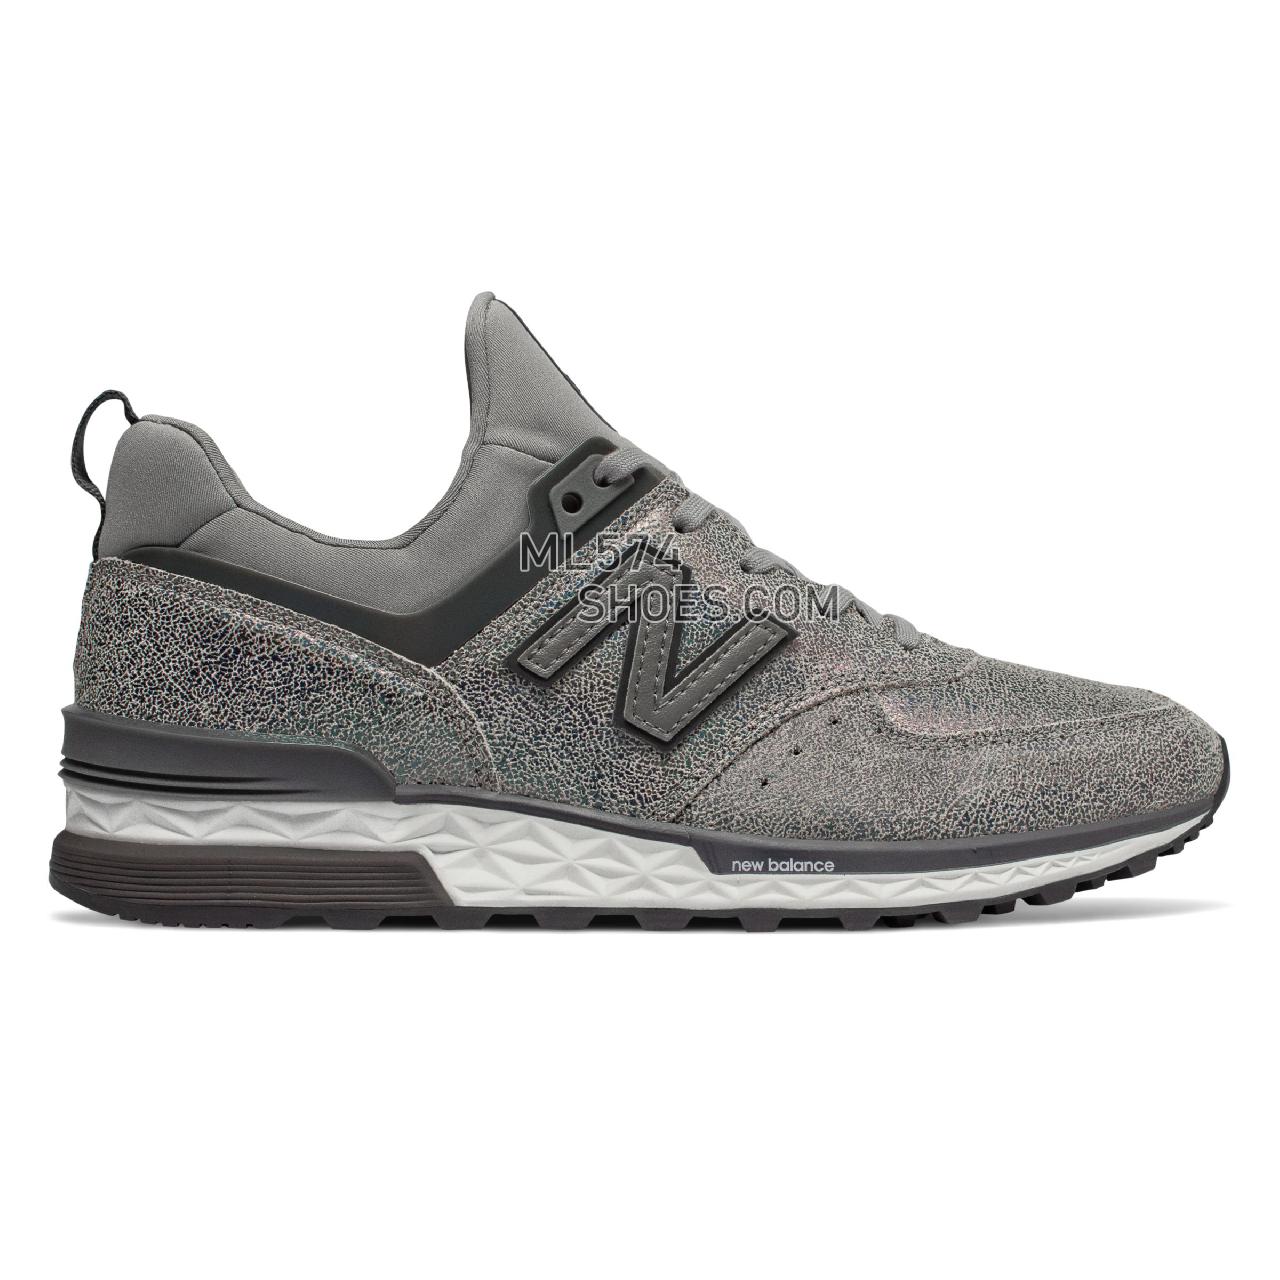 New Balance 574 Sport - Women's 574 - Classic Marblehead with Magnet - WS574TRB